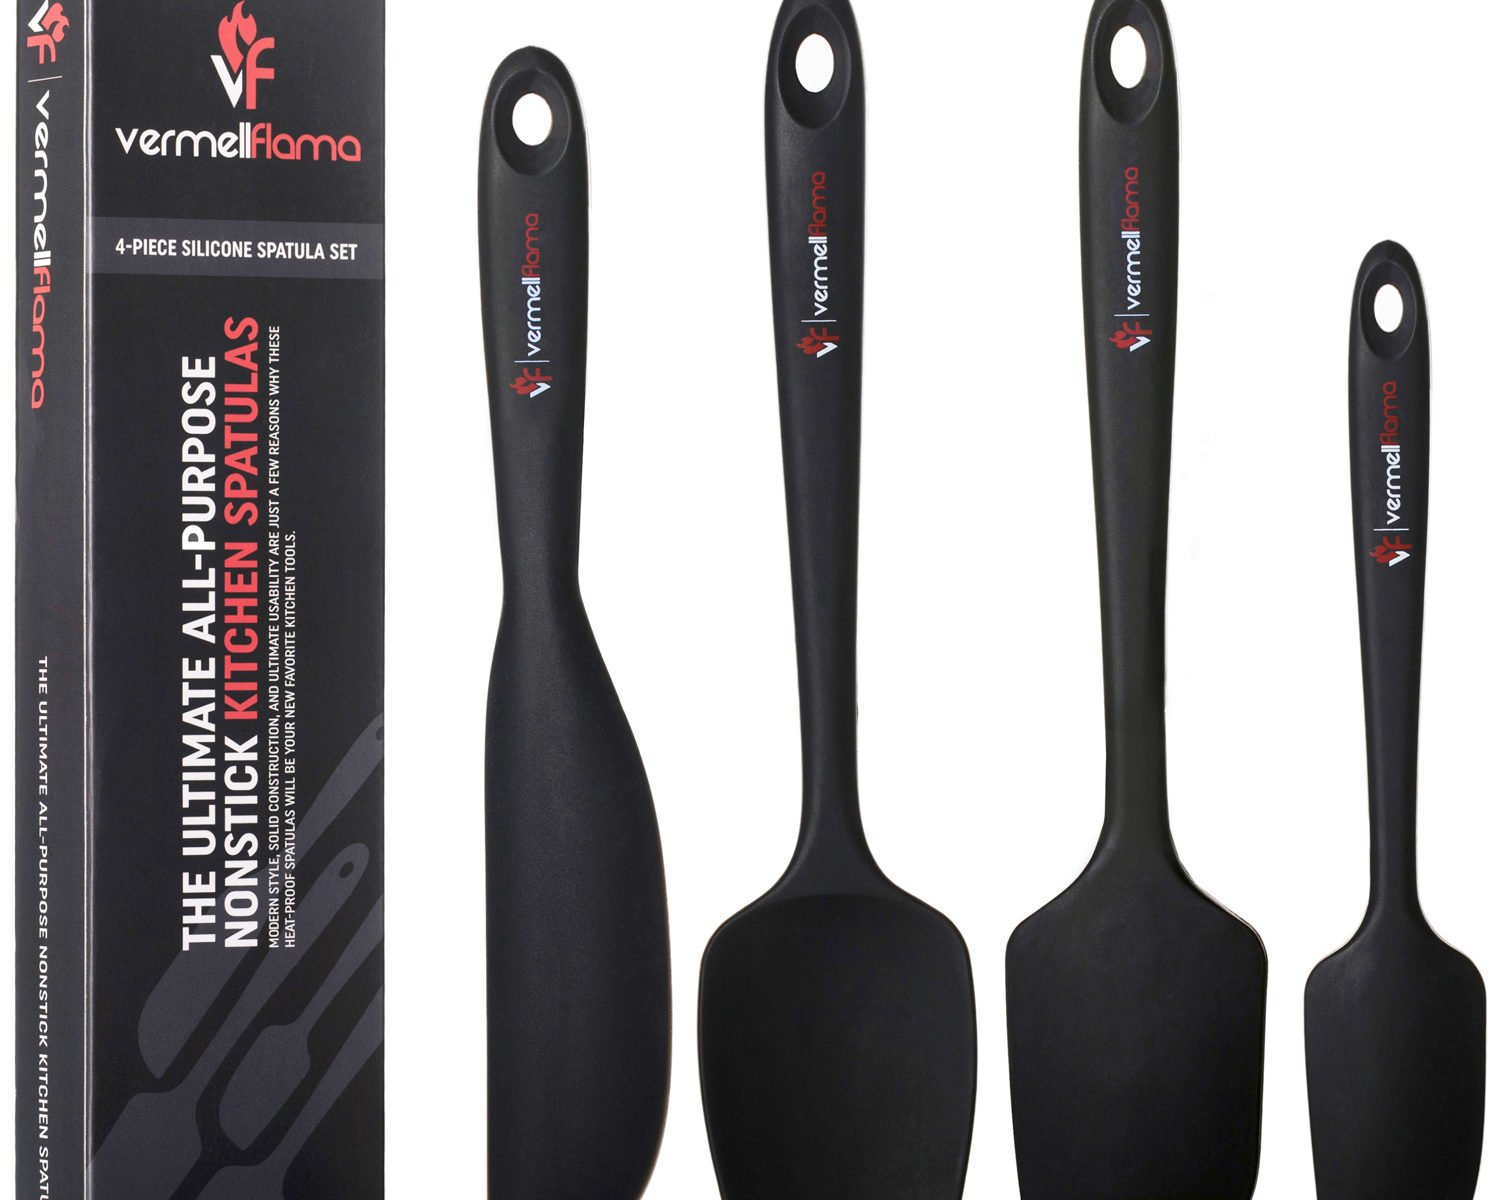 The Ultimate Kitchen Tool: Large Silicone Spatula - Heat Resistant